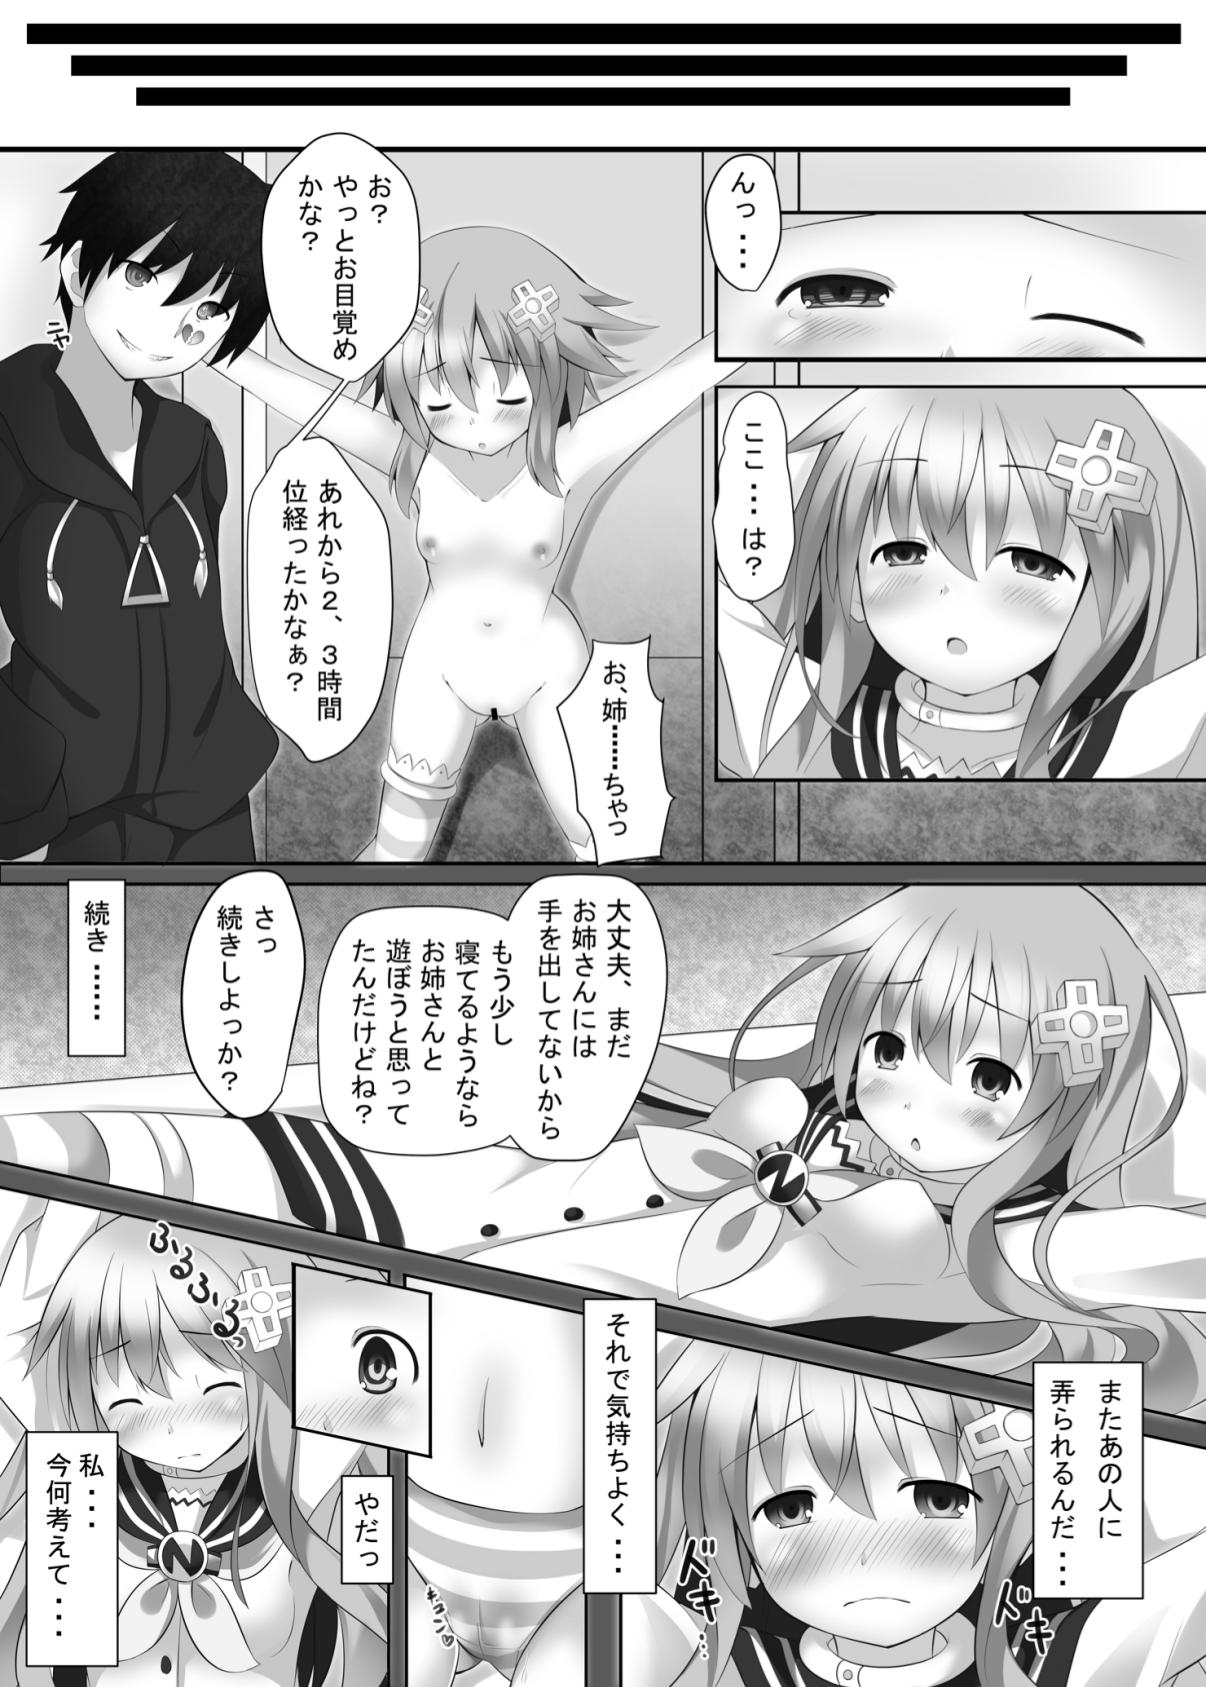 Suck Cock slave sister - Hyperdimension neptunia Old And Young - Page 12